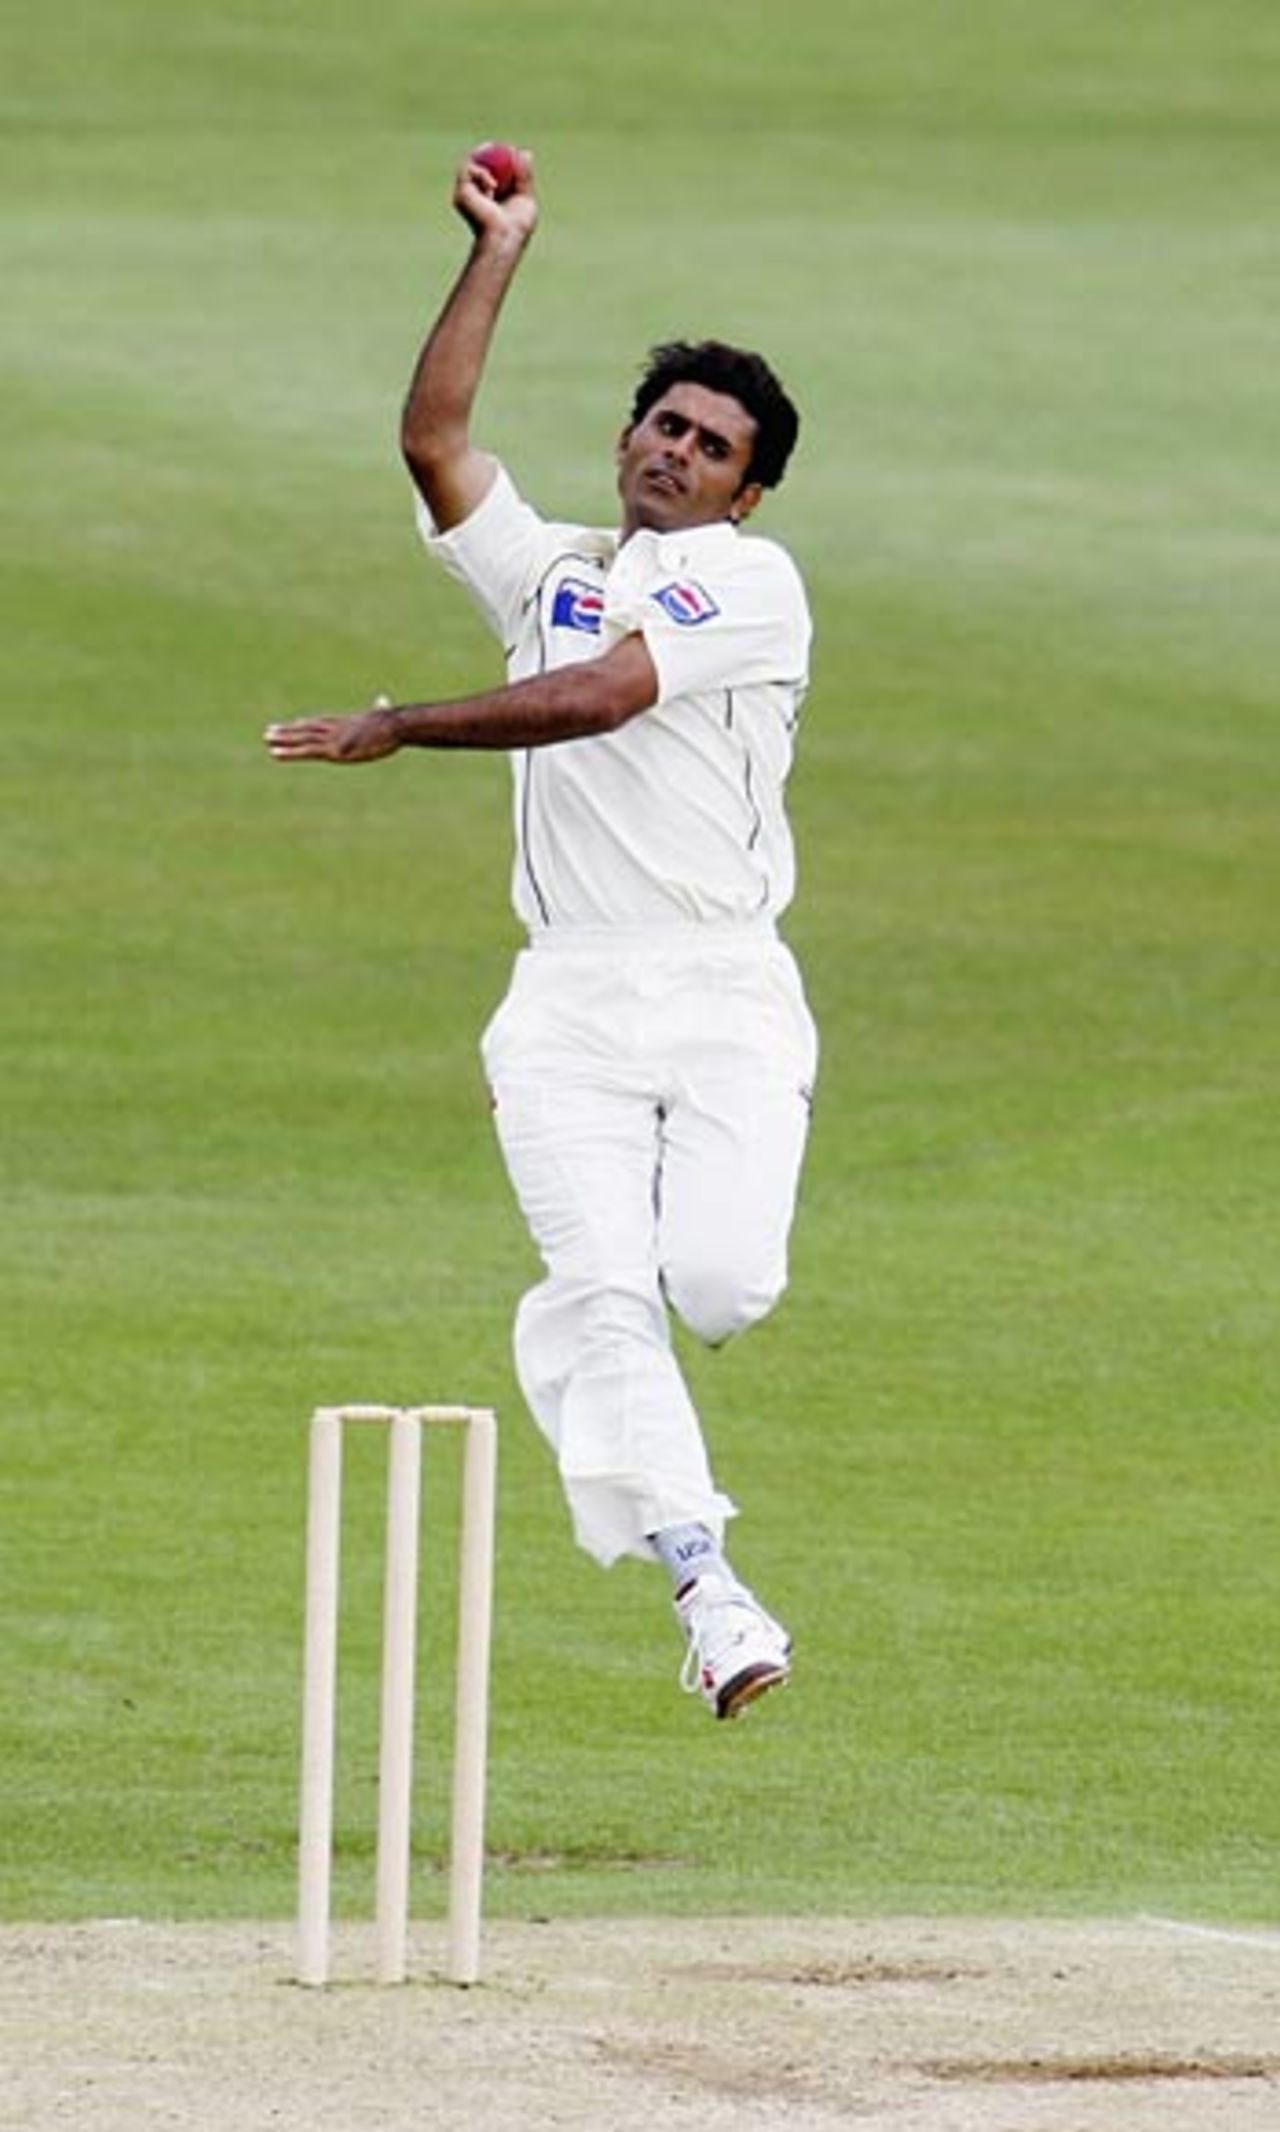 Abdul Razzaq finally ended Robert Key's innings for 136, England A v Pakistanis, Canterbury, June 7, 2006